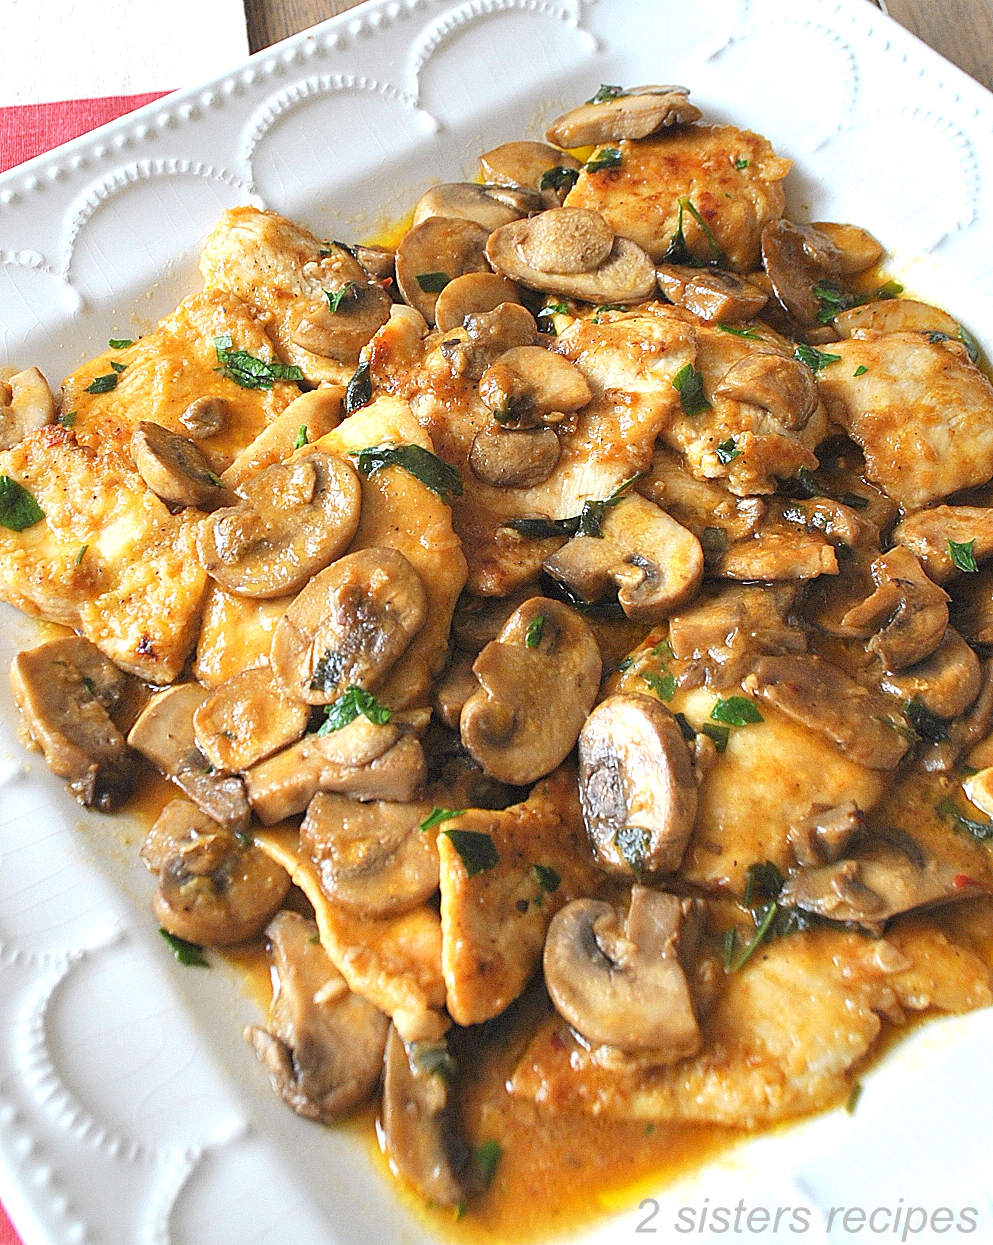 A white platter filled with pieces of cooked chicken and mushrooms in a brown gravy.